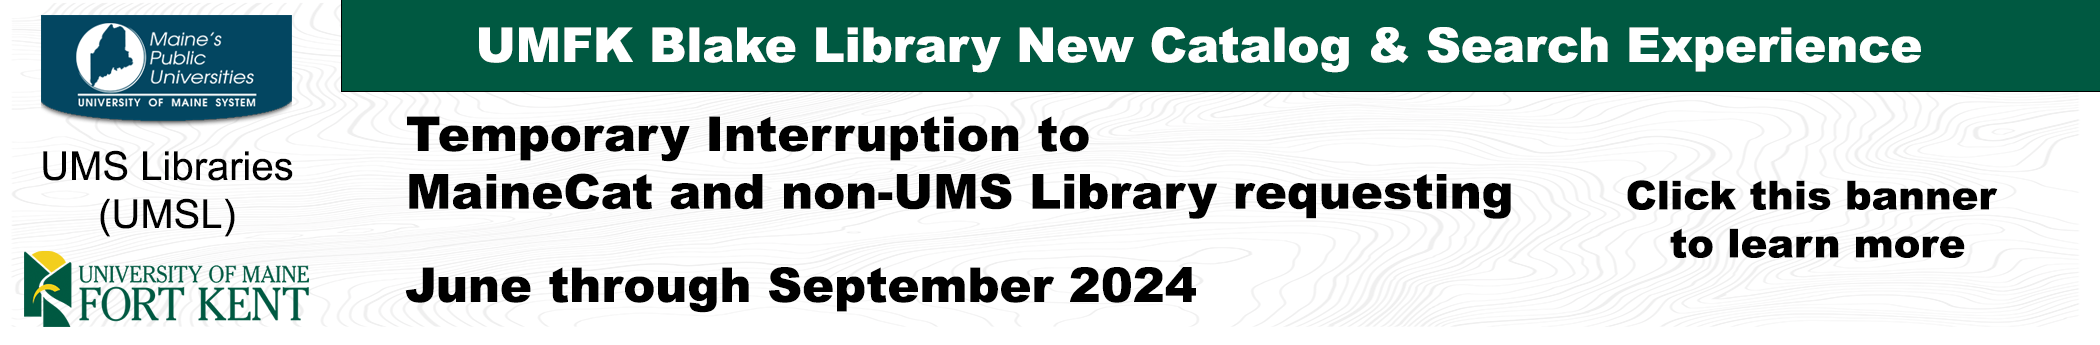 temporary interruption to mainecat and non-ums library requesting june through september. click banner for more information